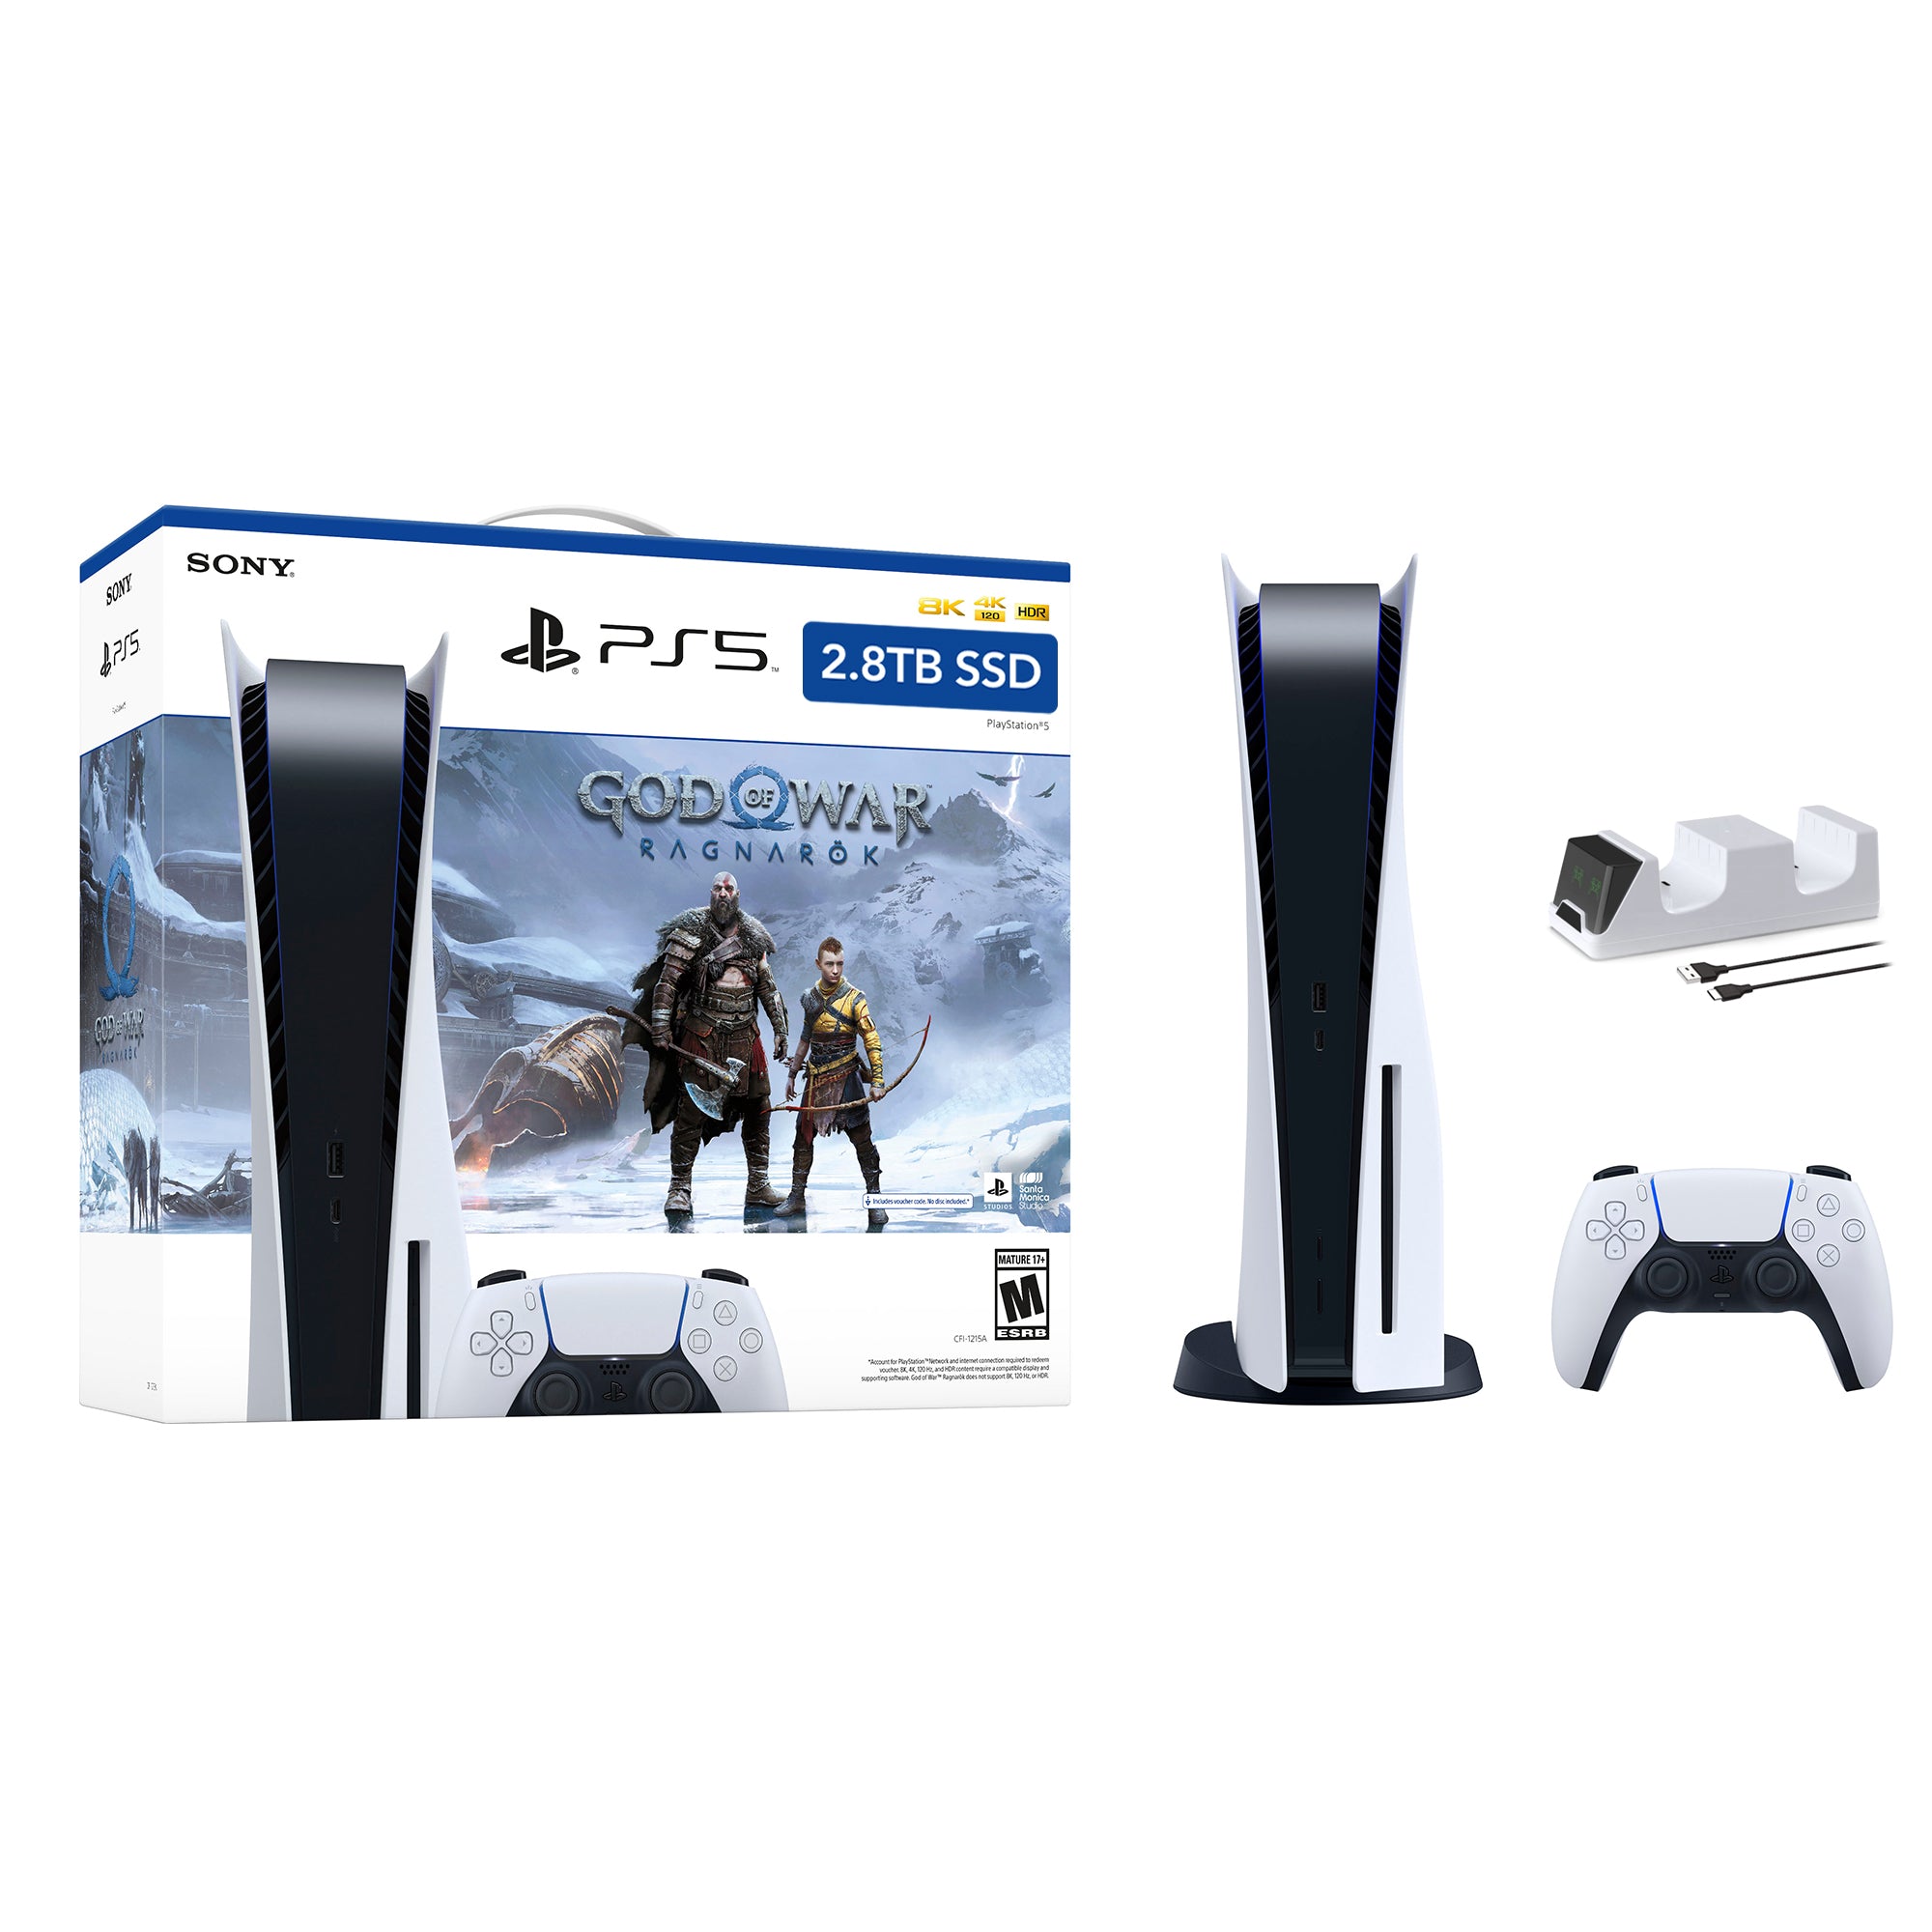 PlayStation 5 Upgraded 2.8TB Disc Edition God of War Ragnarok Bundle and Mytrix Controller Charger - White, PS5 Gaming Console